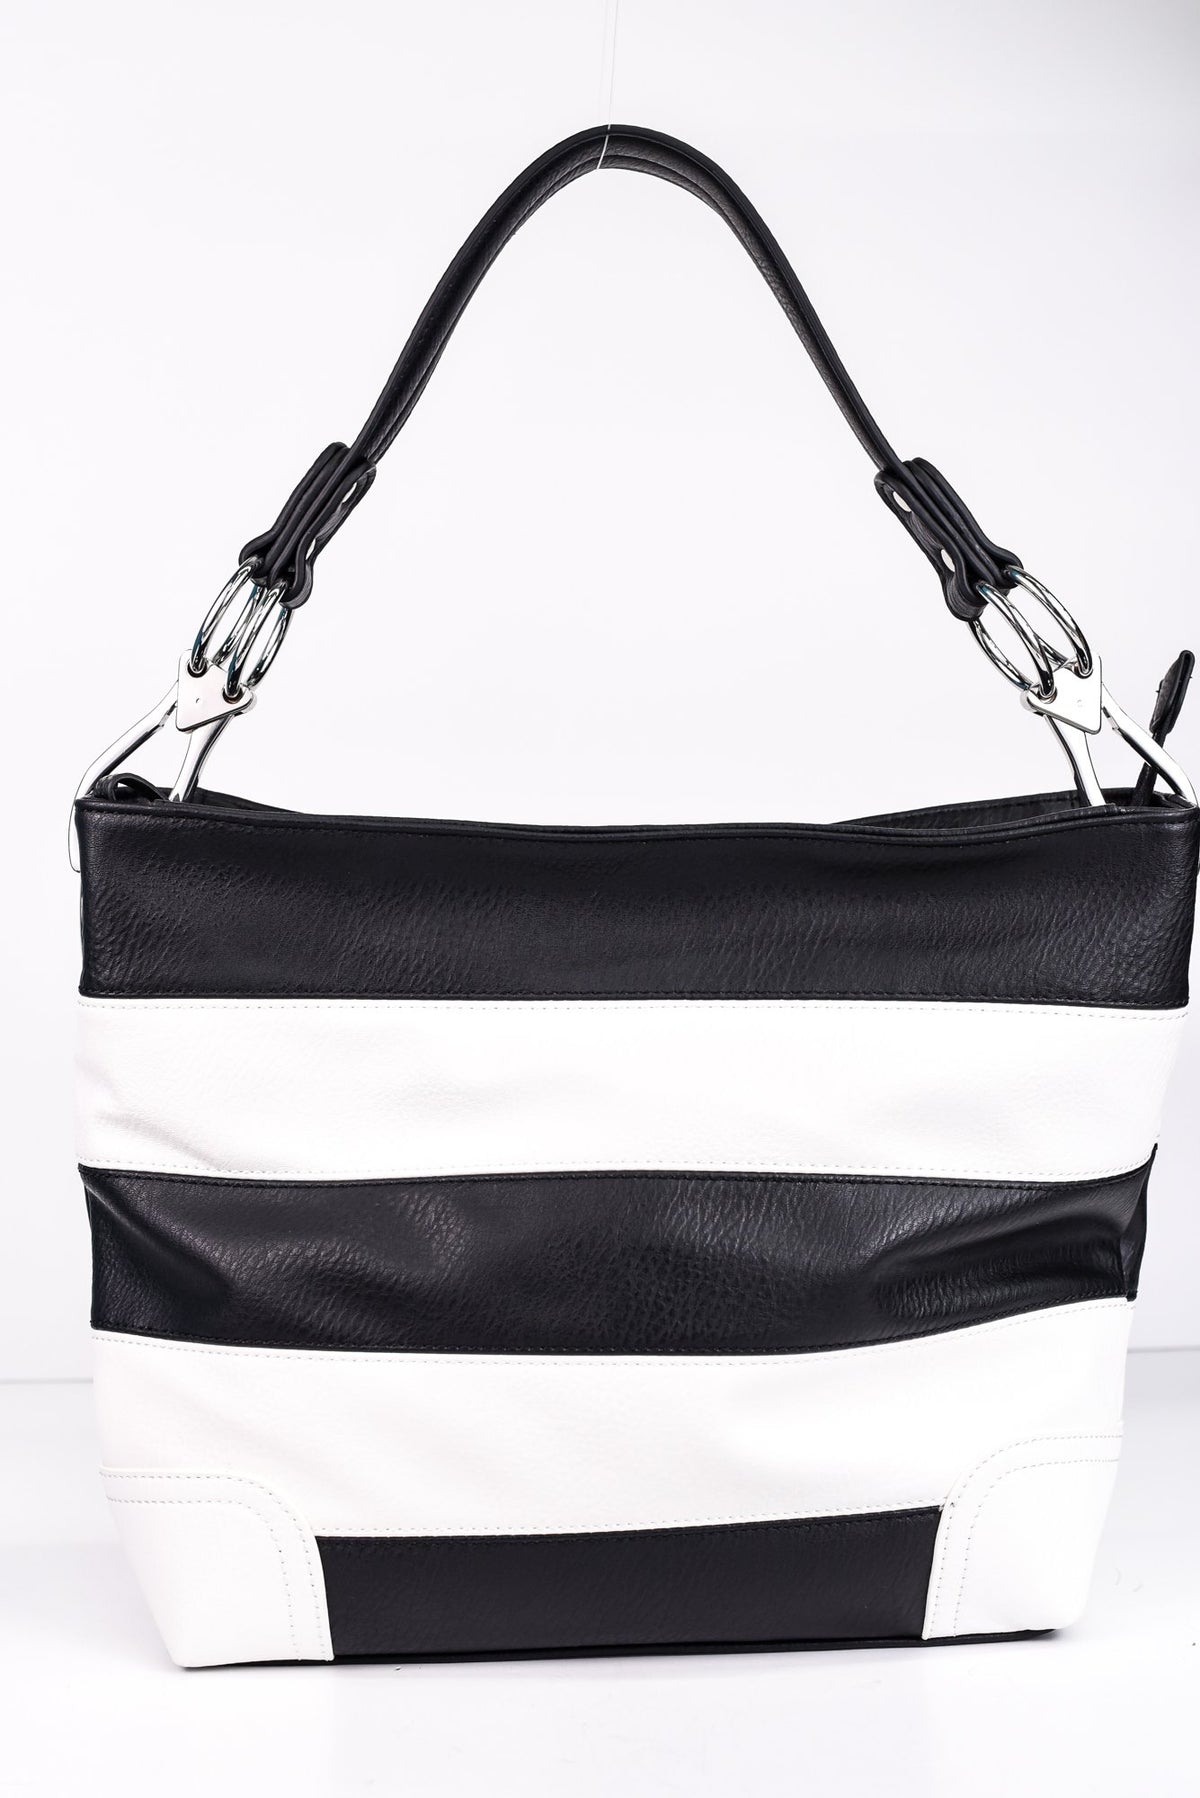 In Line With Style Black/White Striped Bag - BAG1333BK